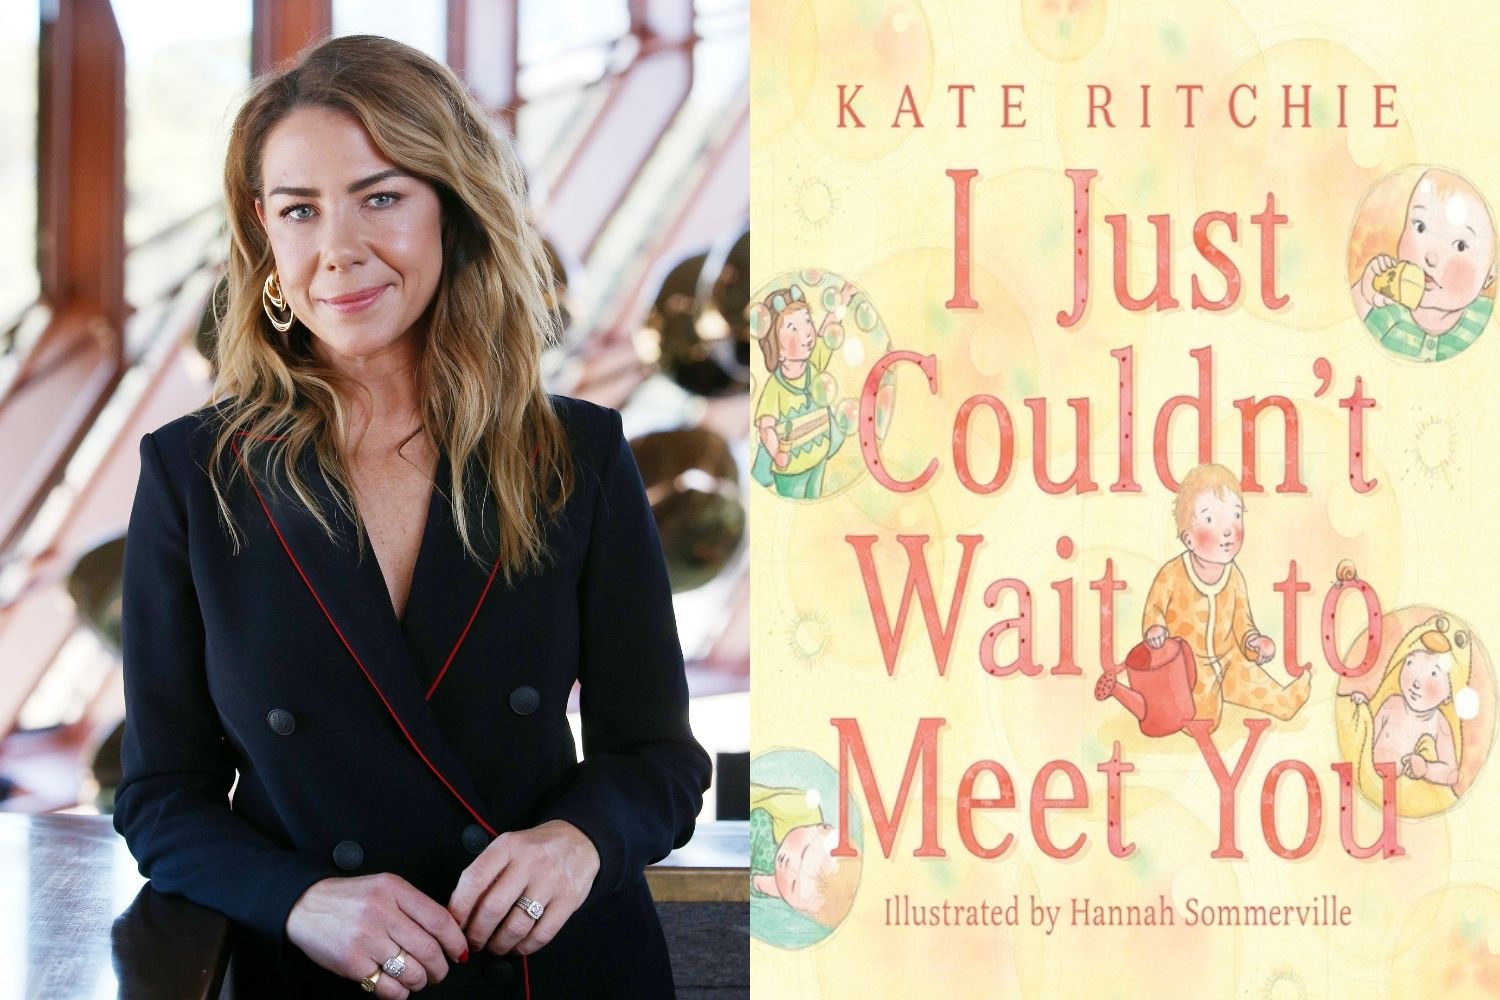 kate ritchie book